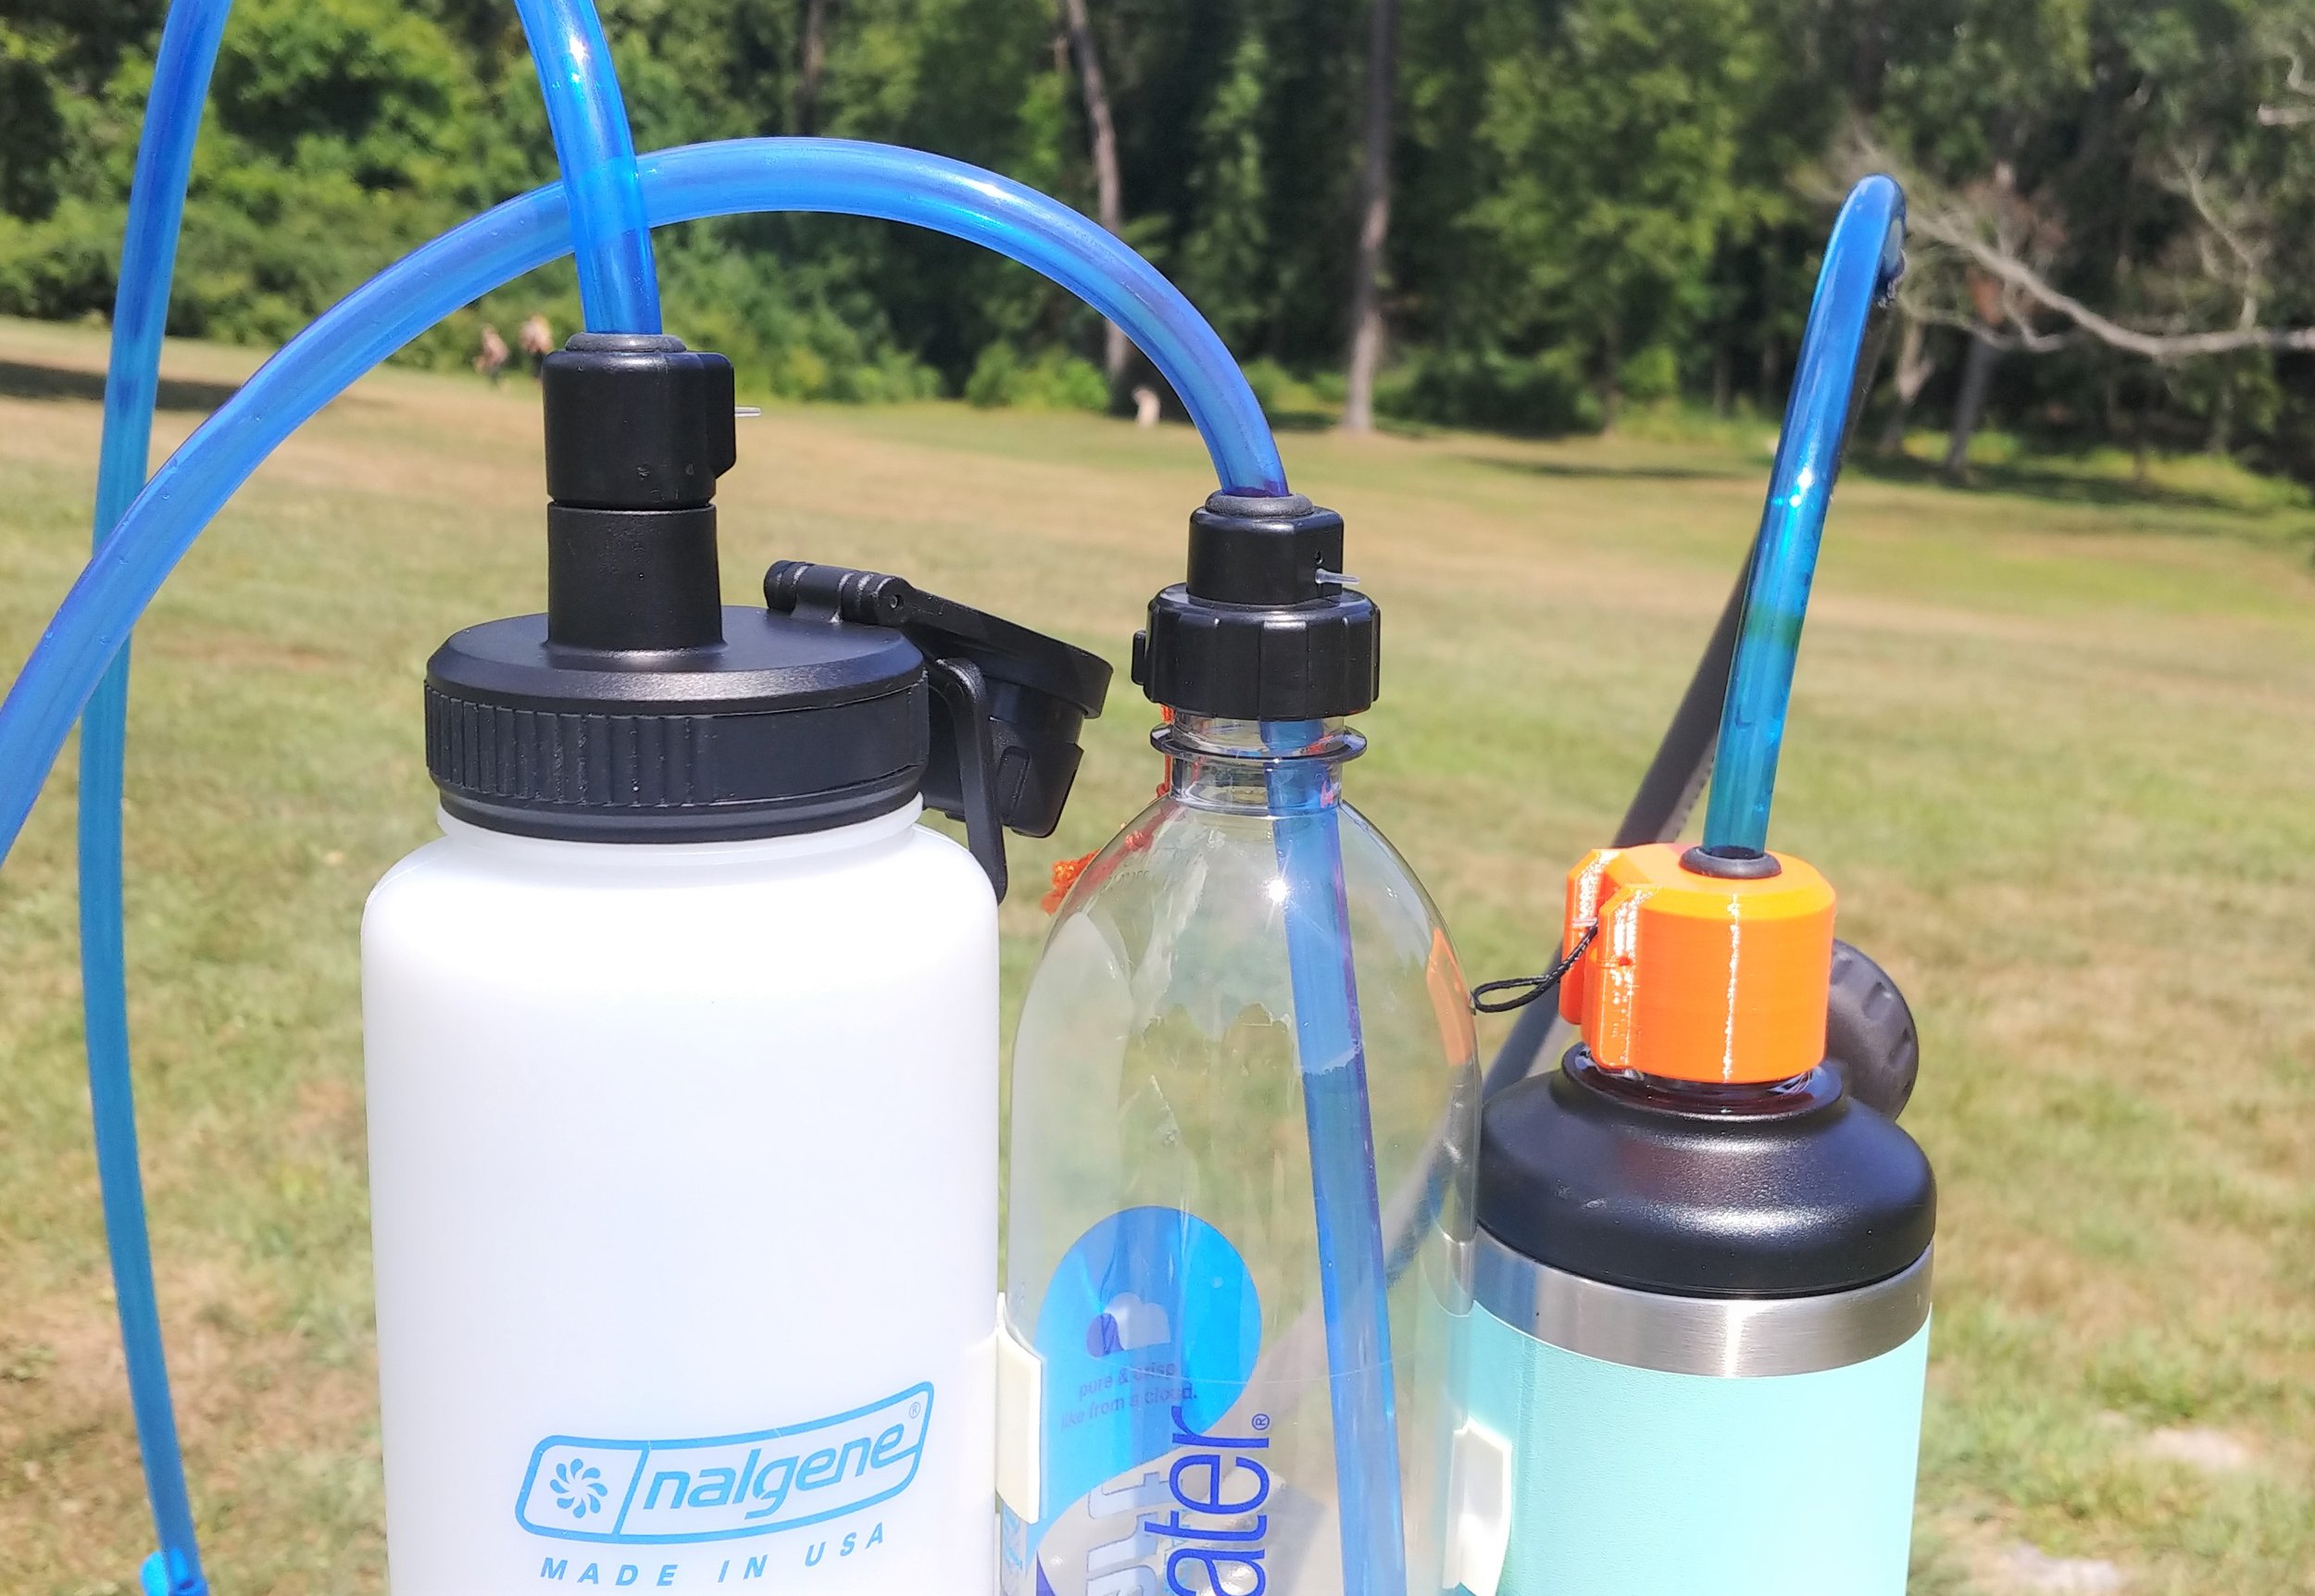 One Bottle Hydration System for YETI™ Yonder Bottles — One Bottle Hydration